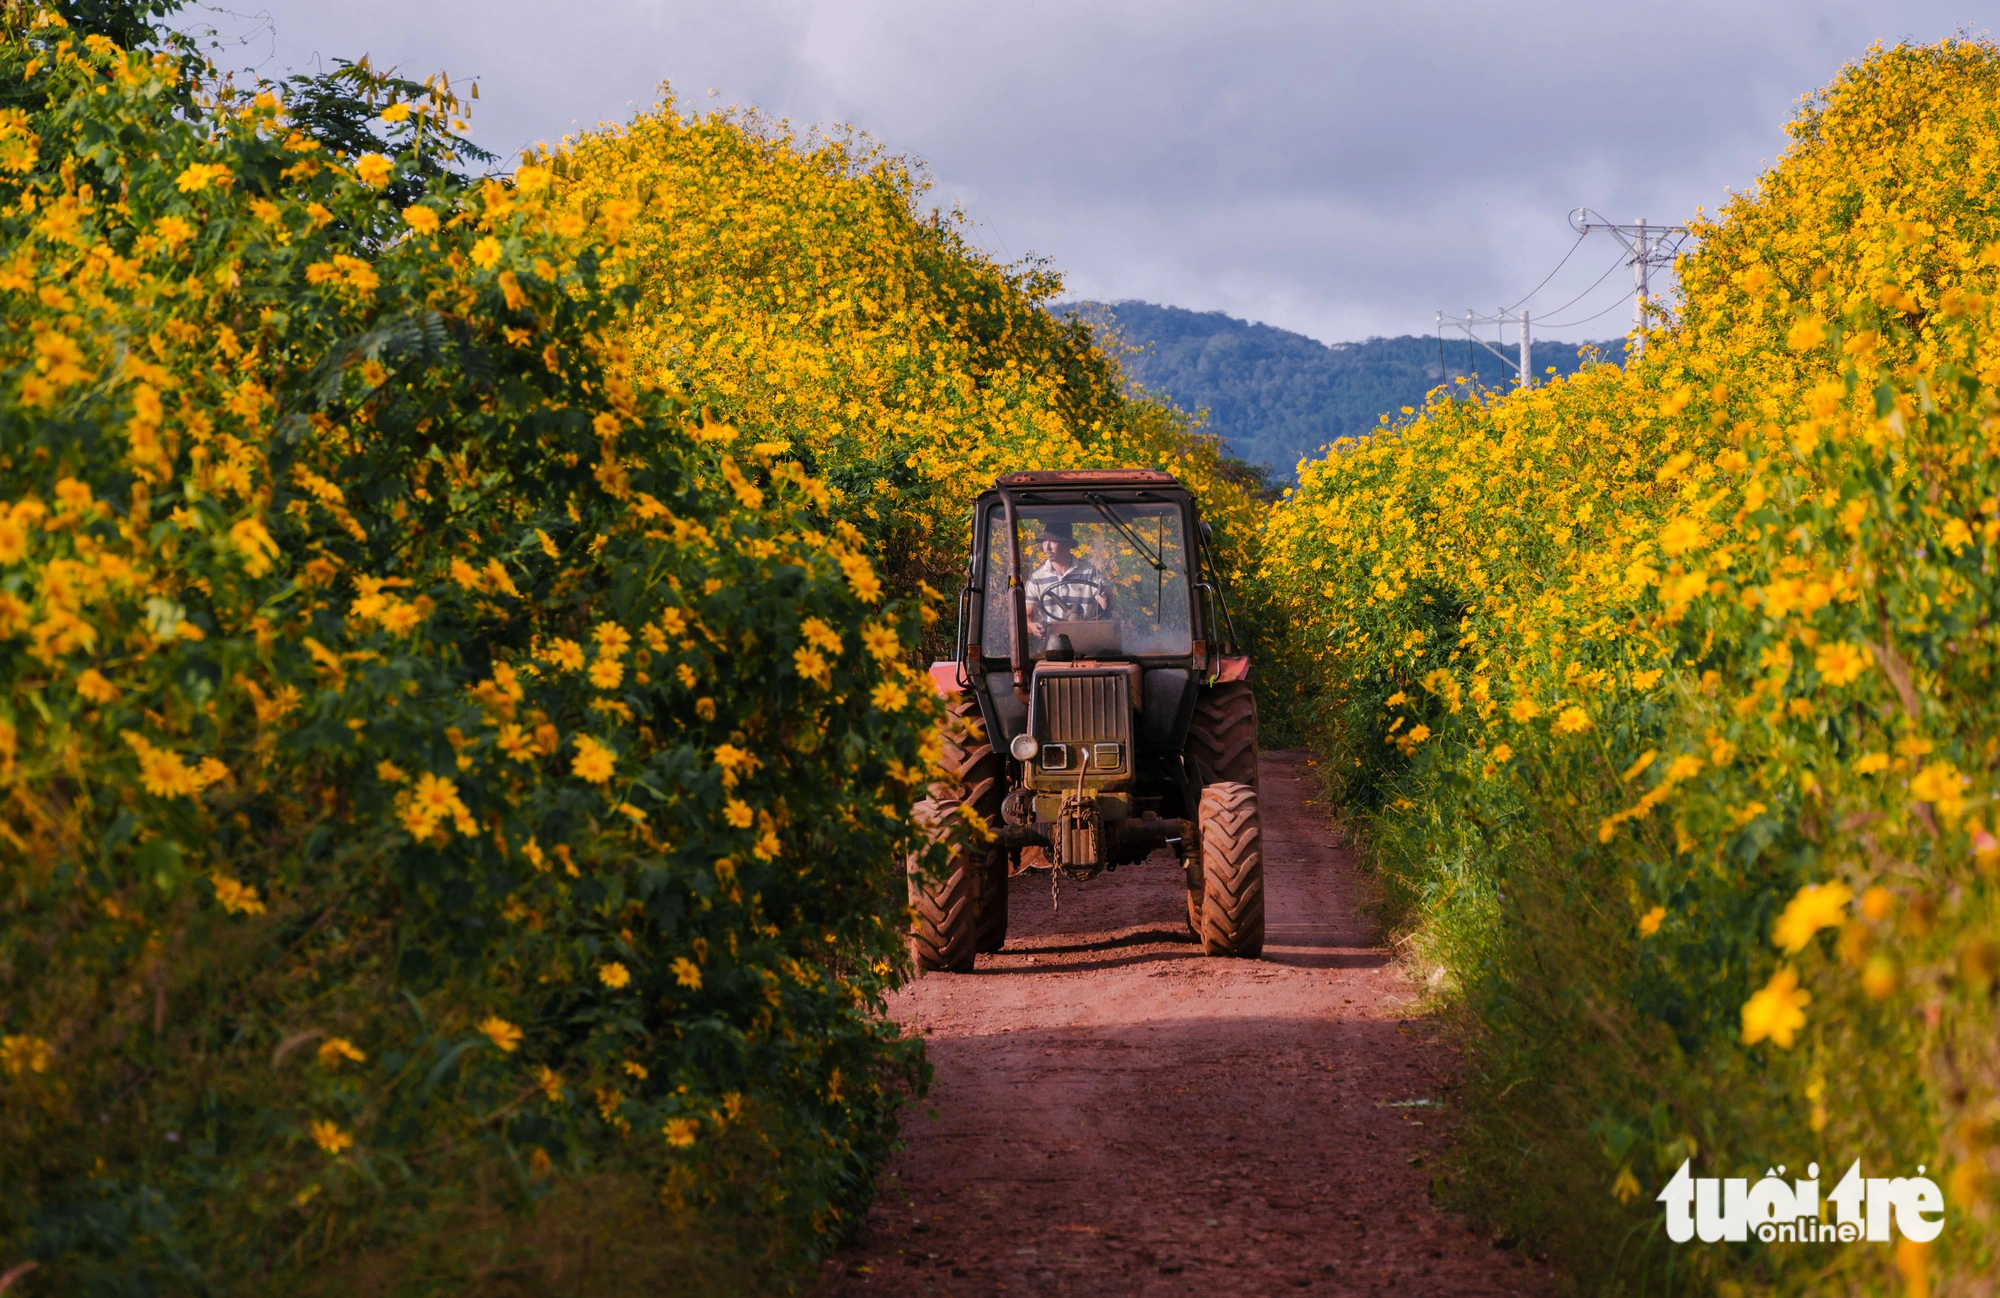 A tractor travels along a wild sunflower-filled road in the Tu Tra region, Don Duong District, Lam Dong Province, Vietnam. Photo: Quang Da Lat / Tuoi Tre